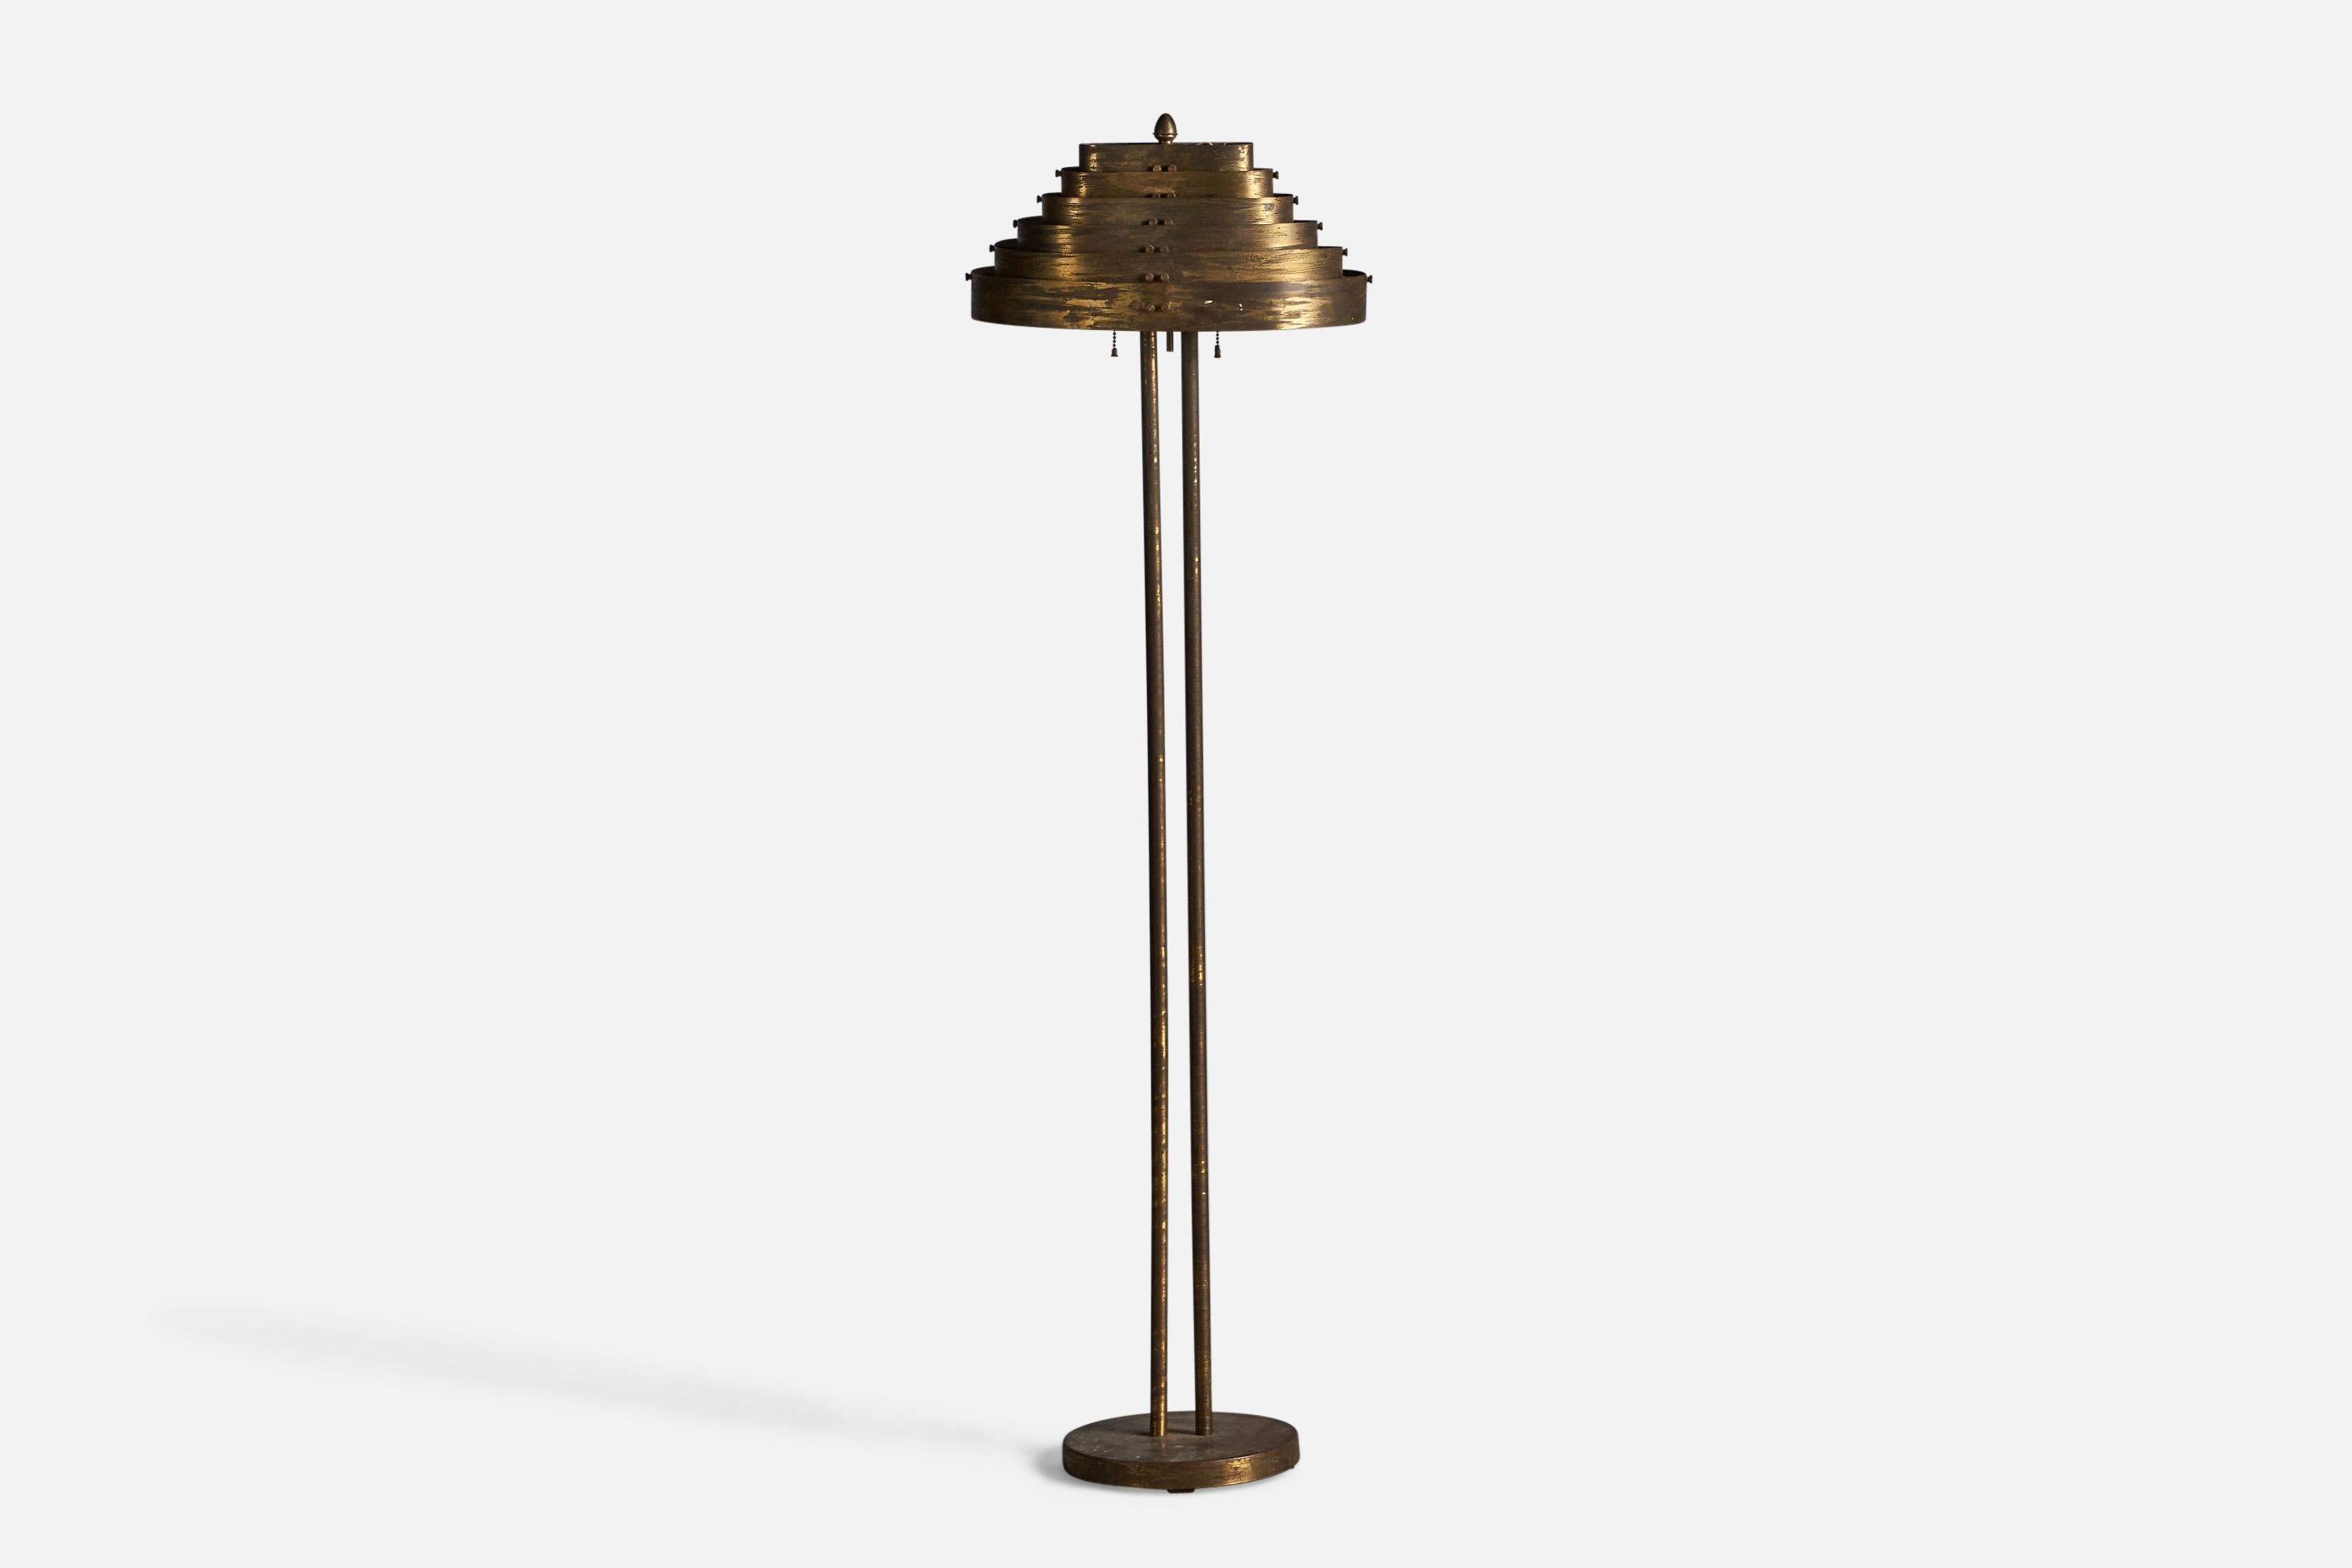 A brass floor lamp, designed and produced by Kurt Versen, USA, 1930s

Overall Dimensions (inches): 57.75